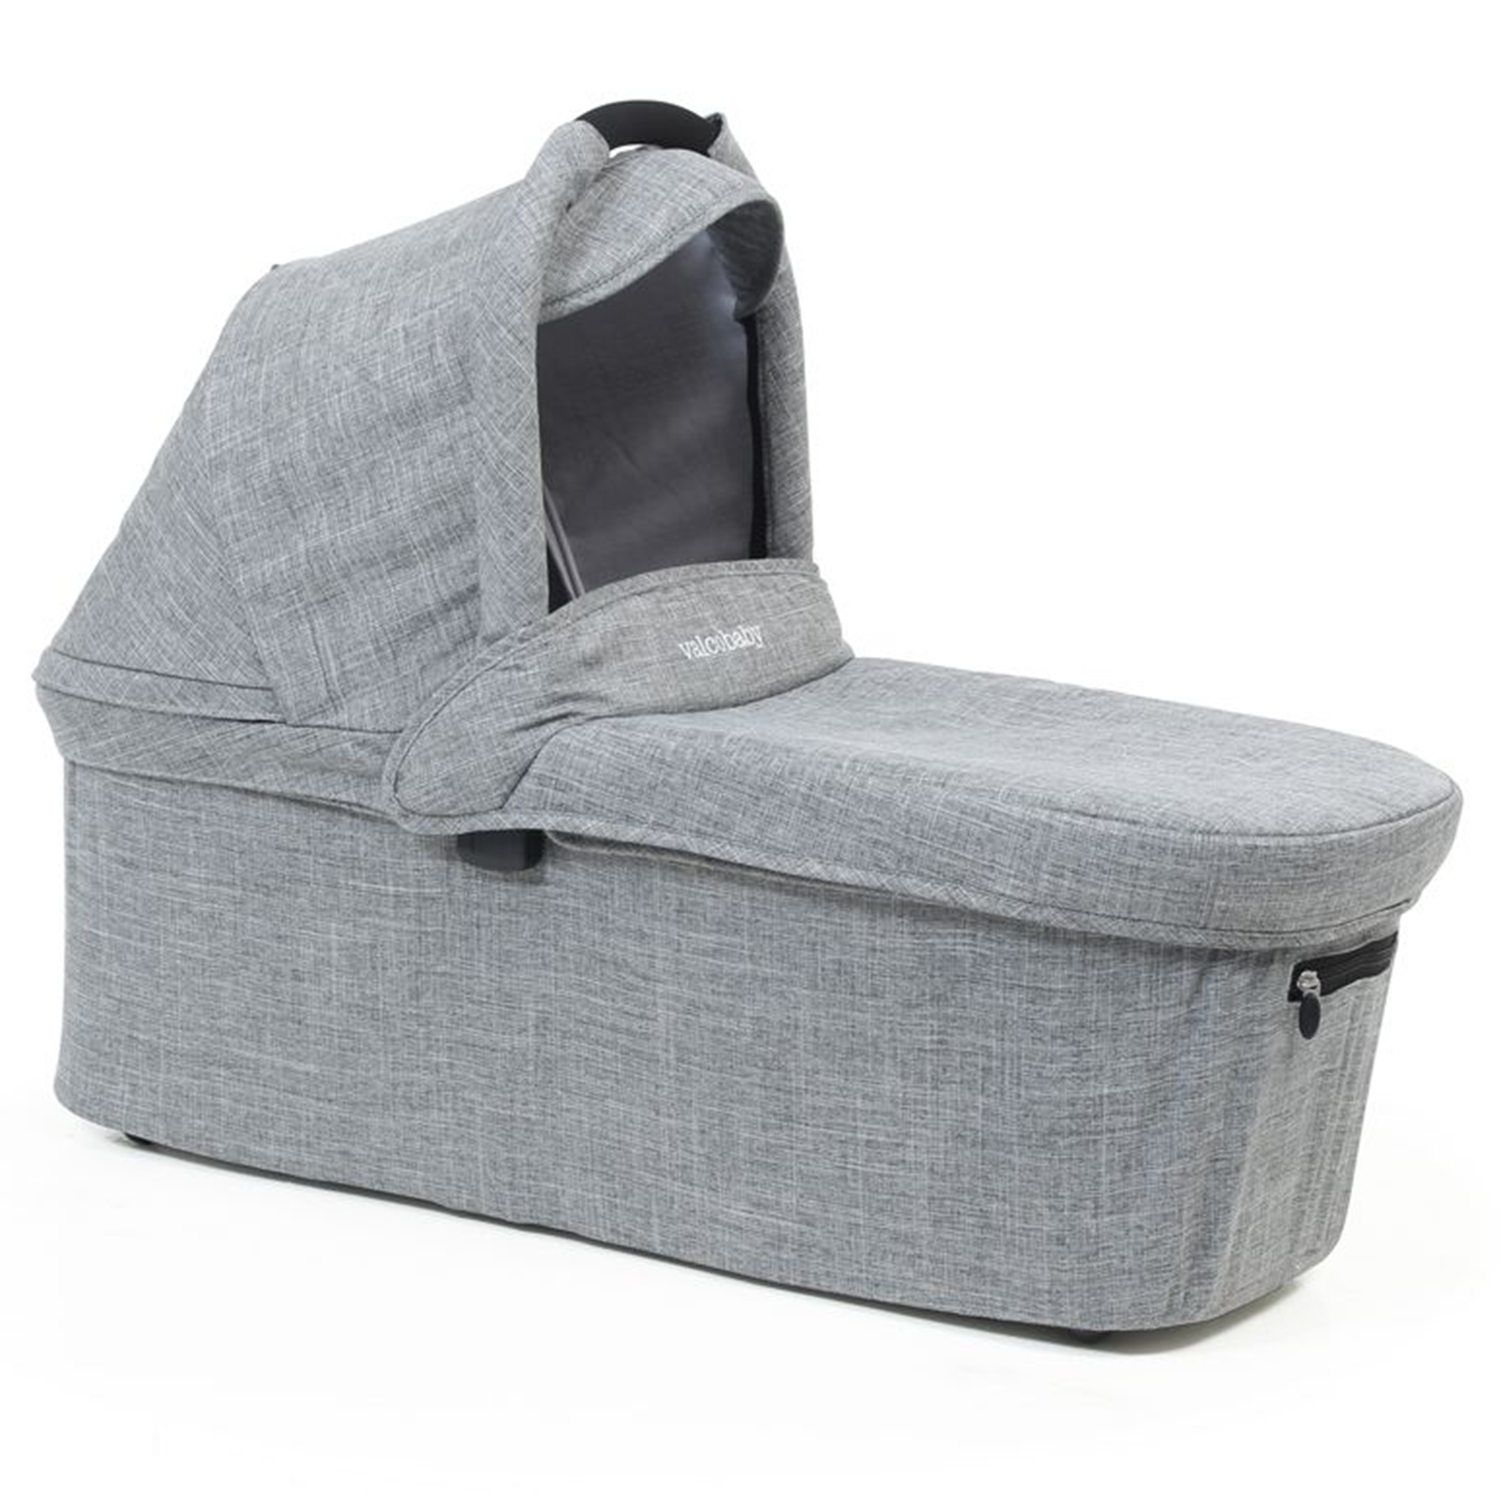 Люлька External Bassinet для Snap Duo Trend / Grey Marle Valco Baby люлька external bassinet для snap trend snap 4 trend snap 4 ultra trend charcoal valco baby